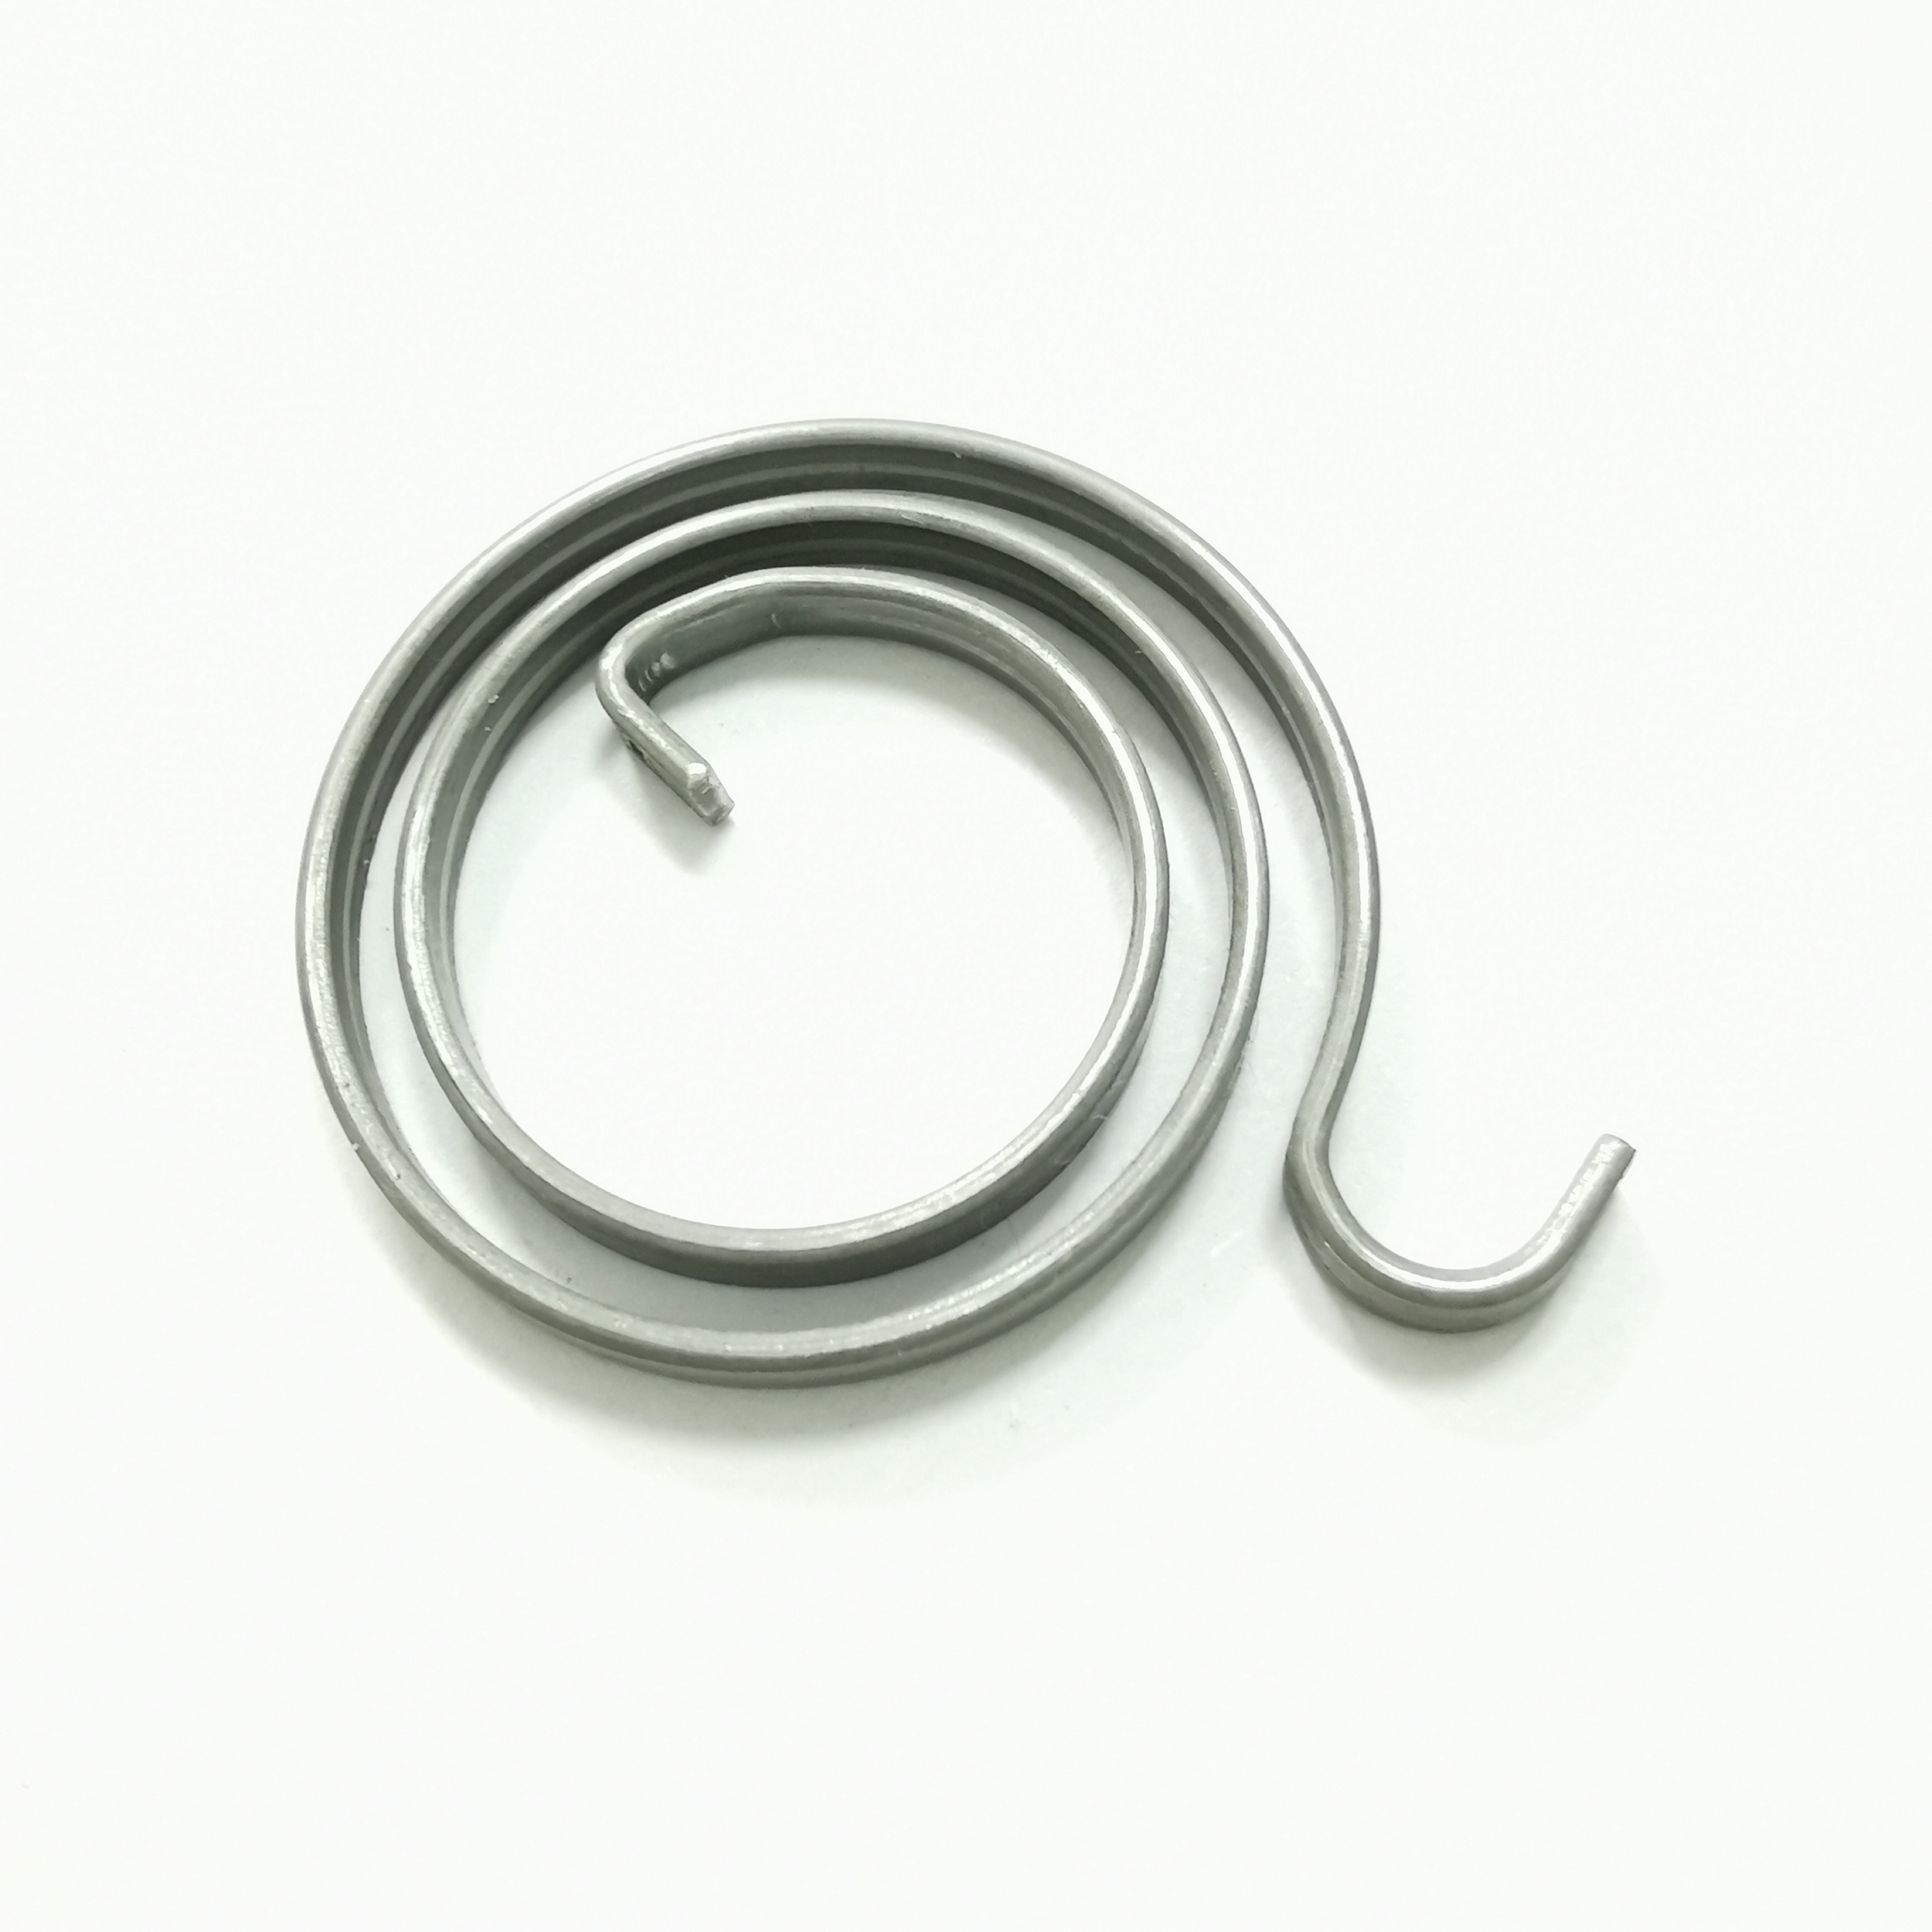 professional Spring C-coil tension spring manufacturers 